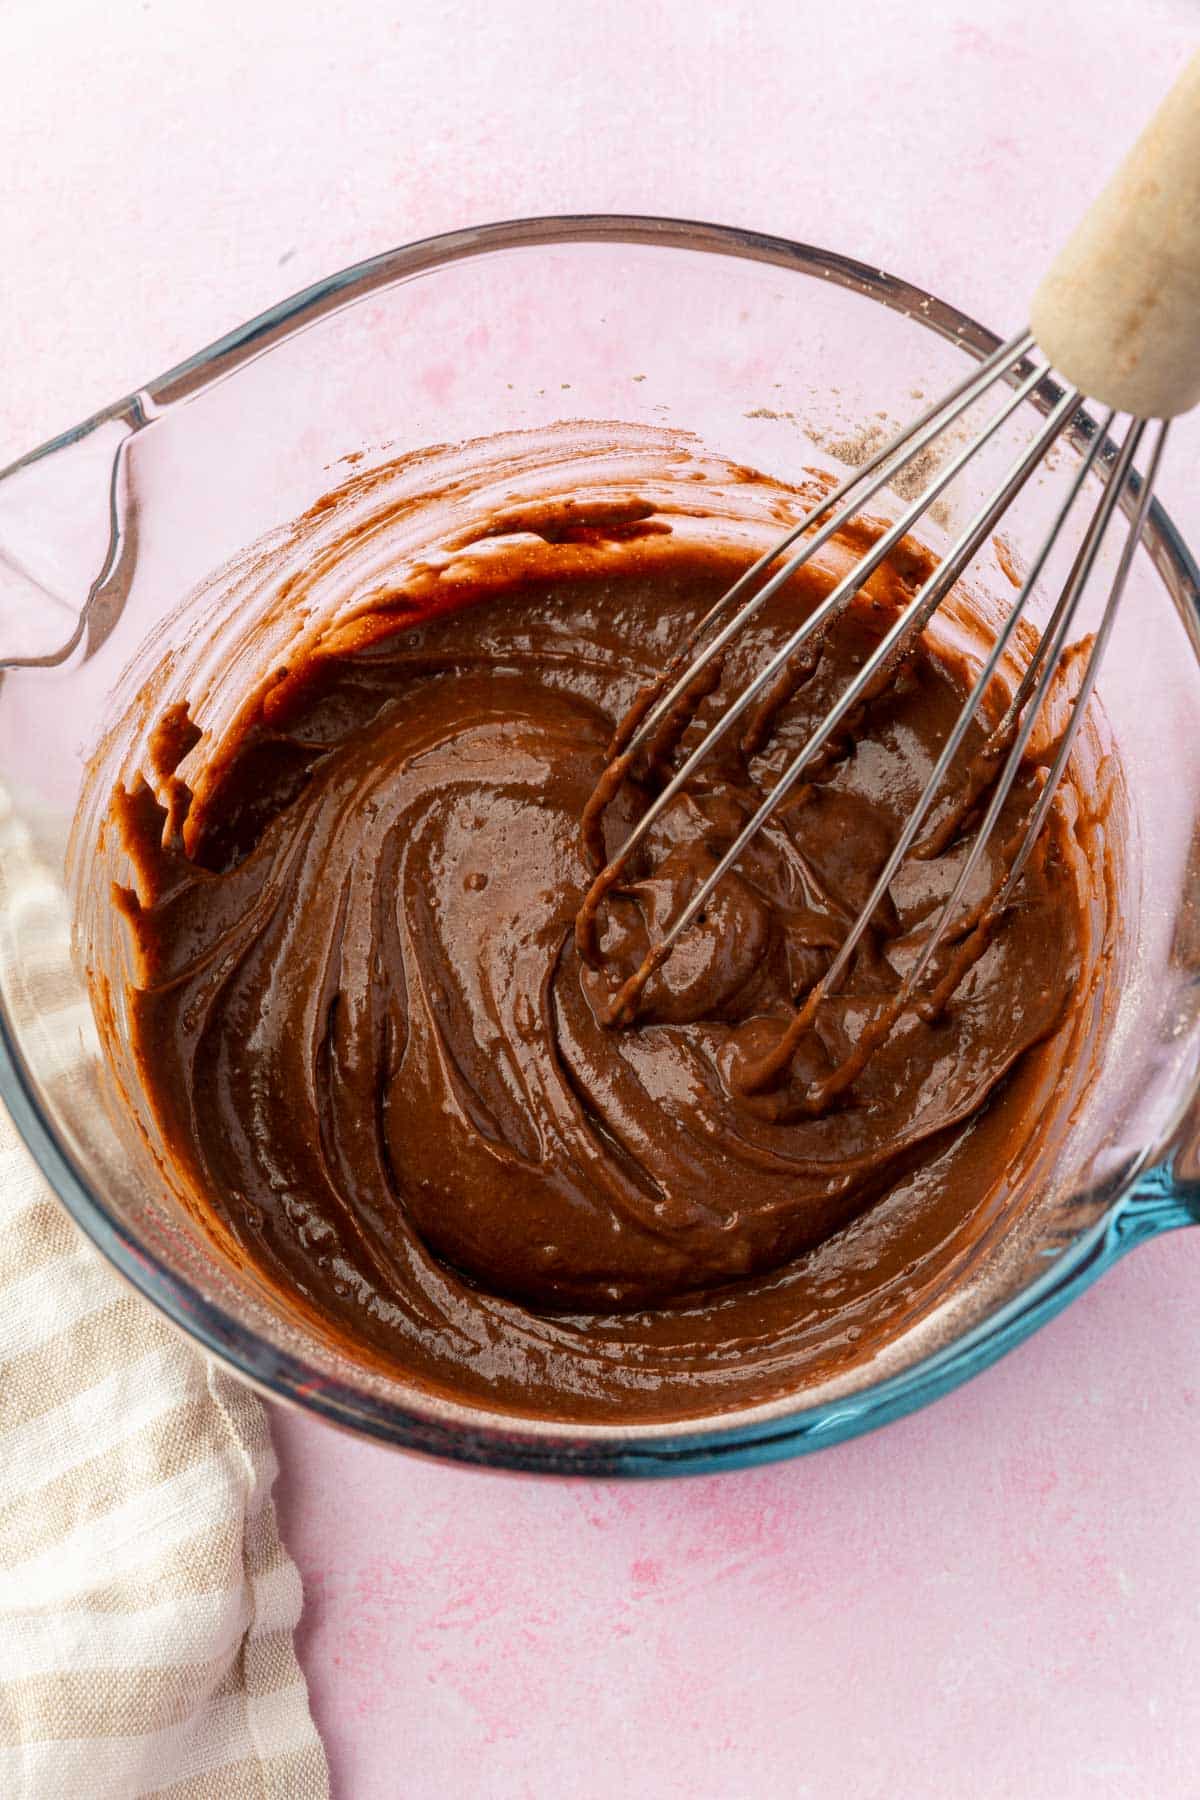 Chocolate pudding in a measuring glass with a whisk.